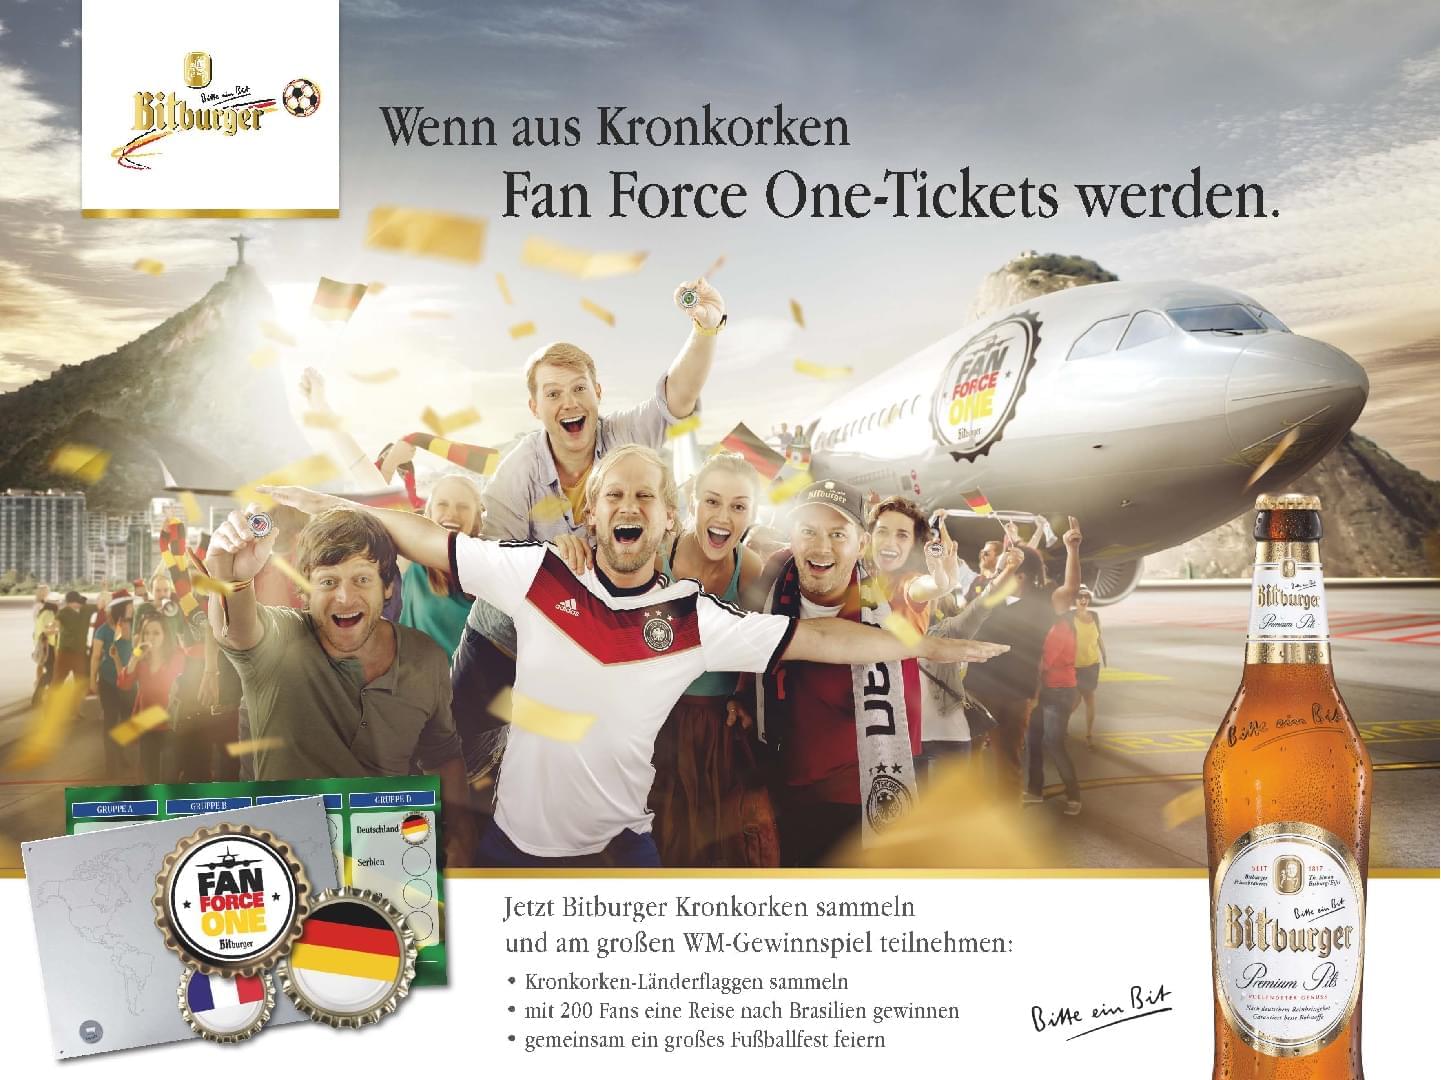 The print ad shows German football fans celebrating in front of the FAN FORCE ONE branded aircraft that says 'Wenn aus Kronkoren Fan Force One-Tickets werden.'